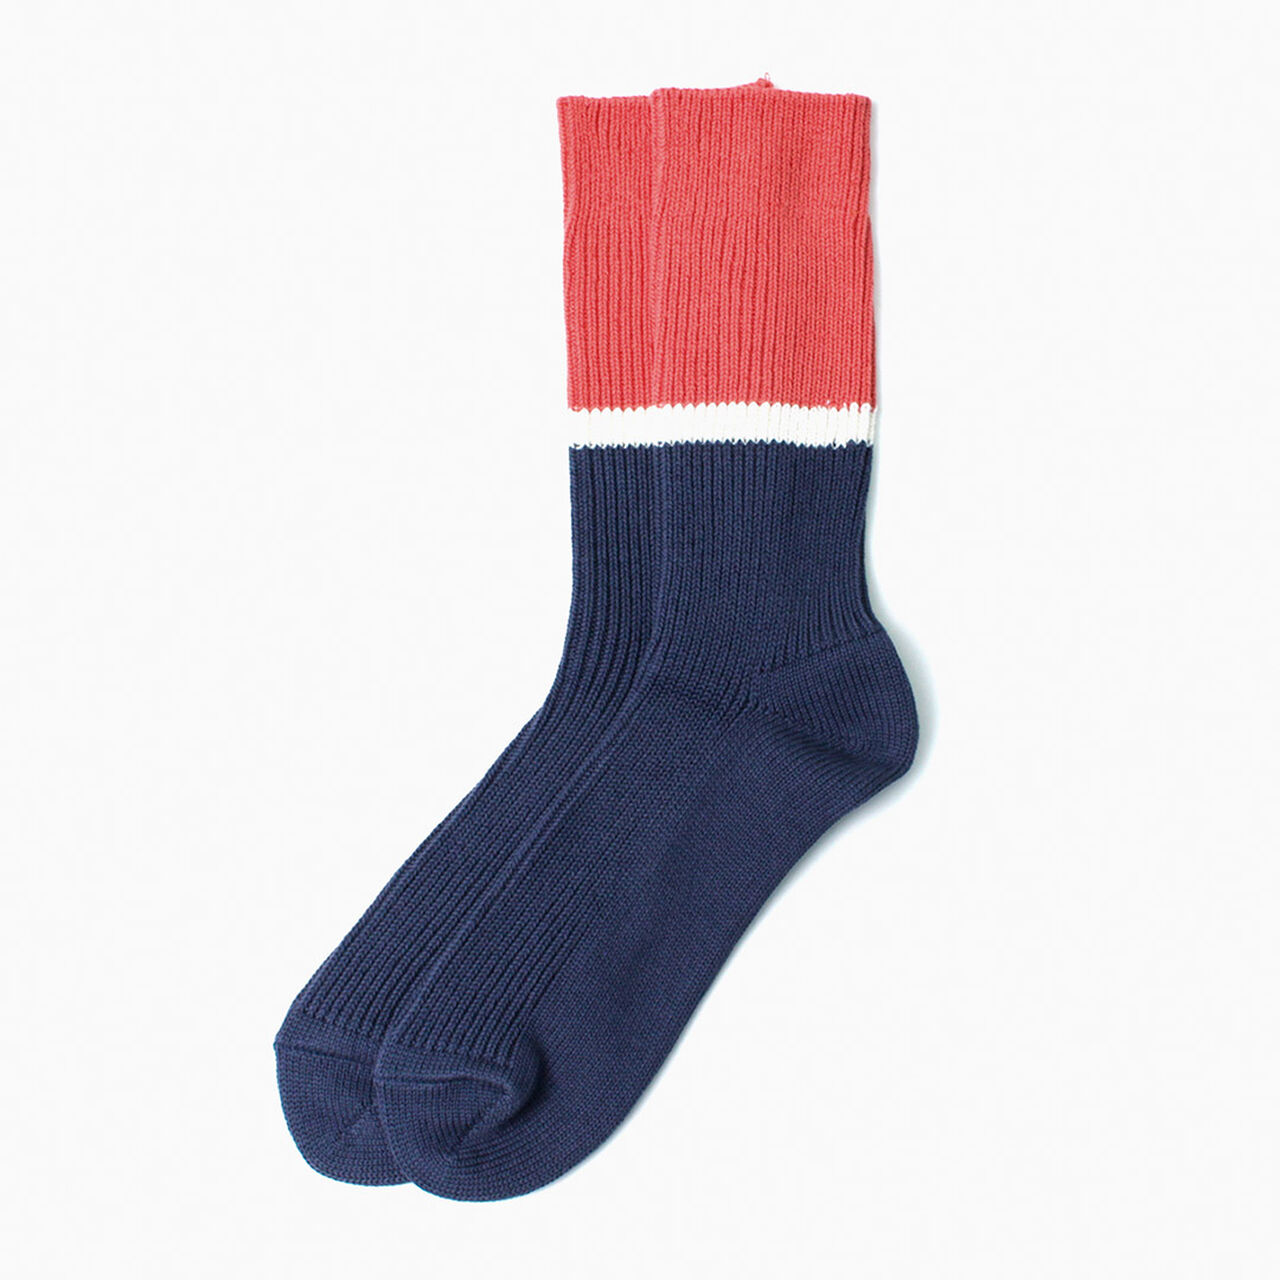 Bicolour ribbed crew socks,LightRed_InkBlue, large image number 0